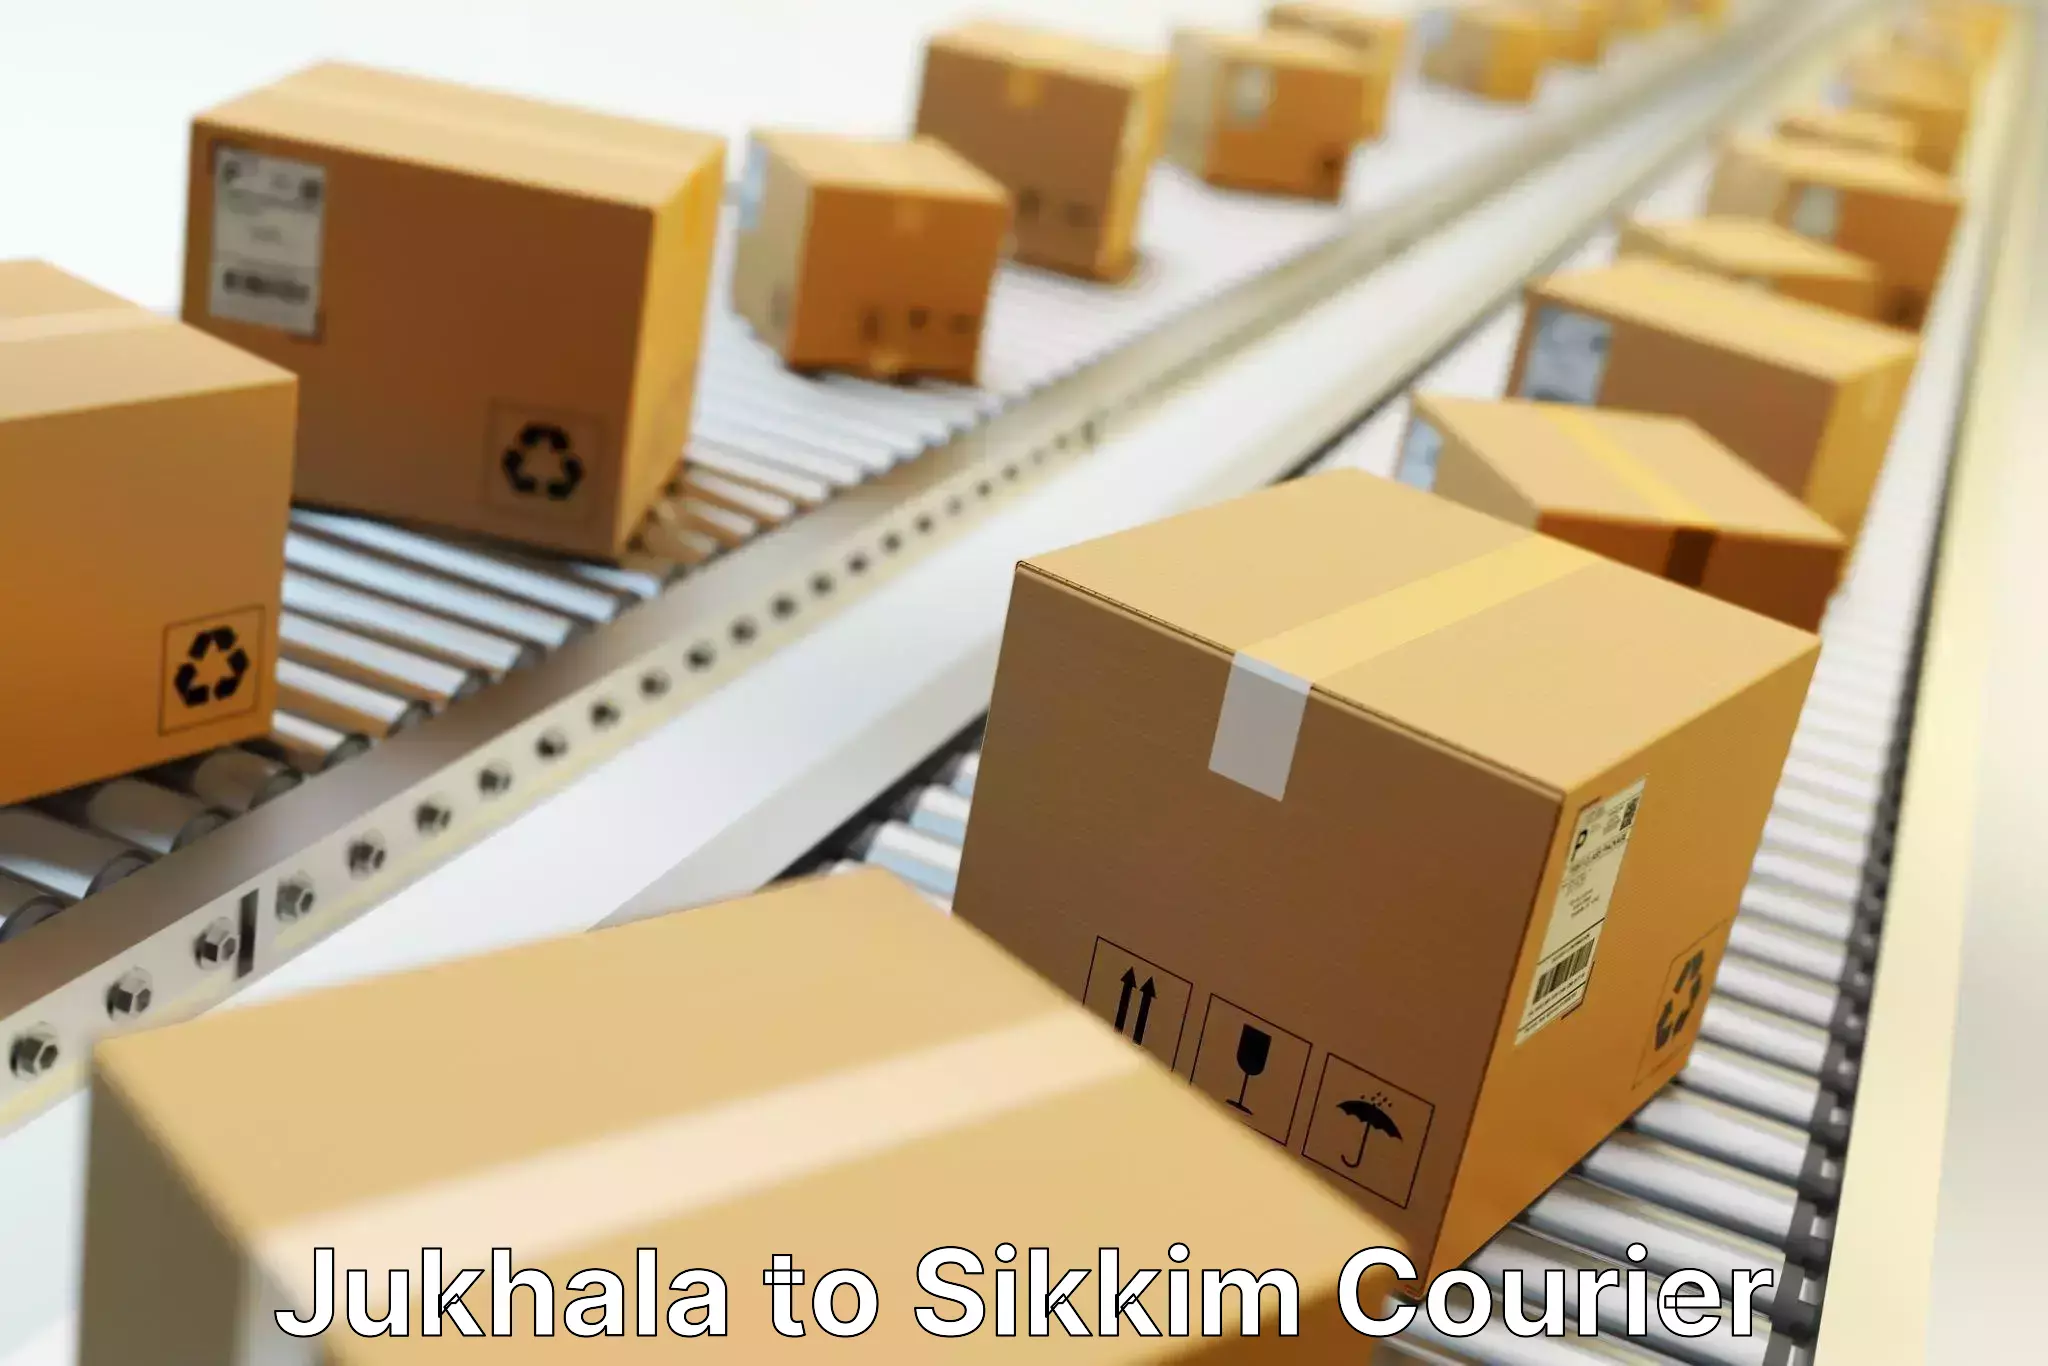 Parcel handling and care Jukhala to North Sikkim